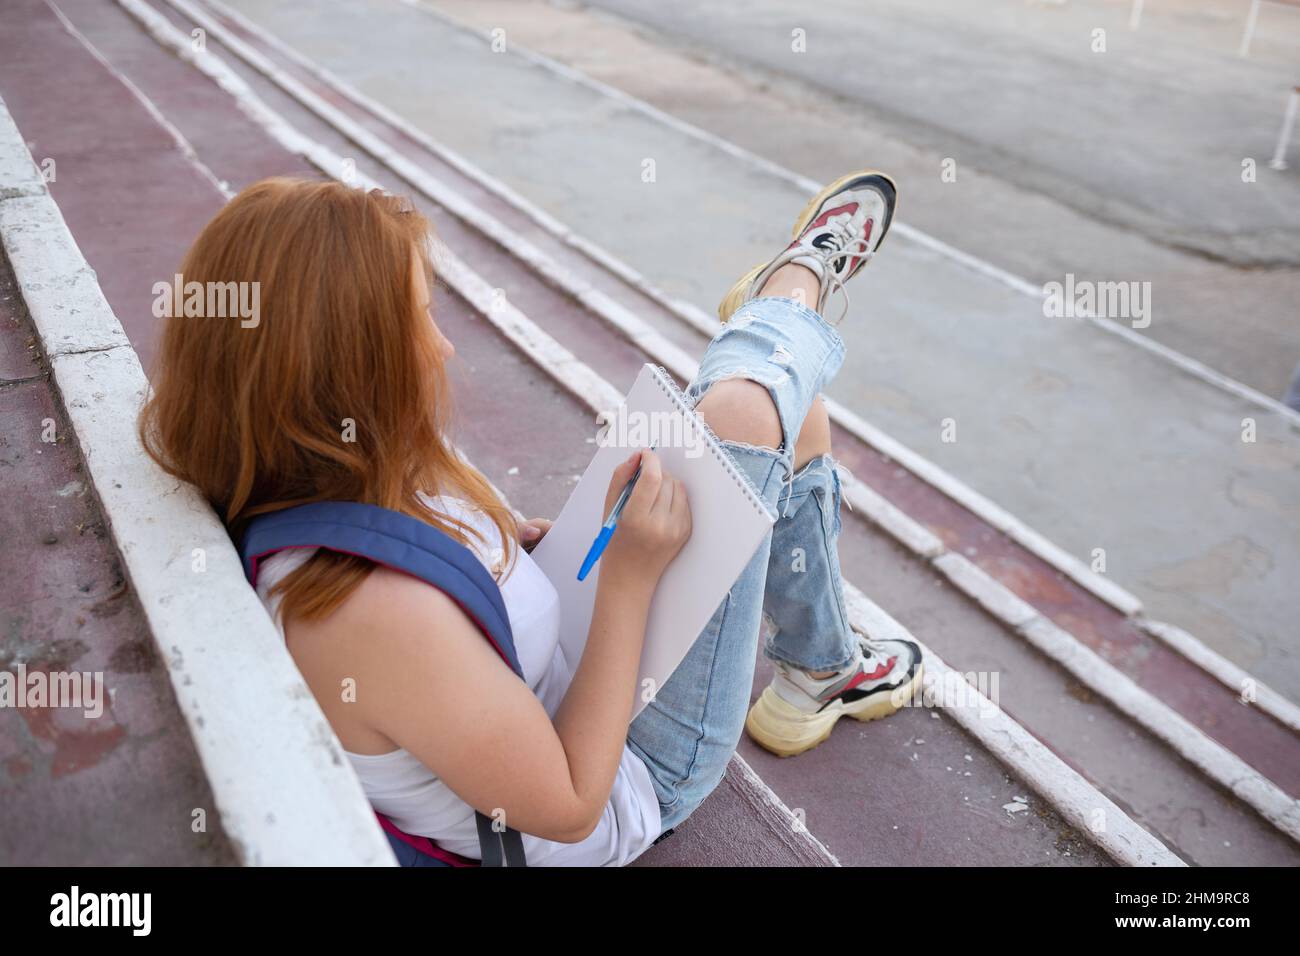 https://c8.alamy.com/comp/2HM9RC8/teenage-girl-draws-in-the-sketchbook-while-sitting-on-the-steps-2HM9RC8.jpg